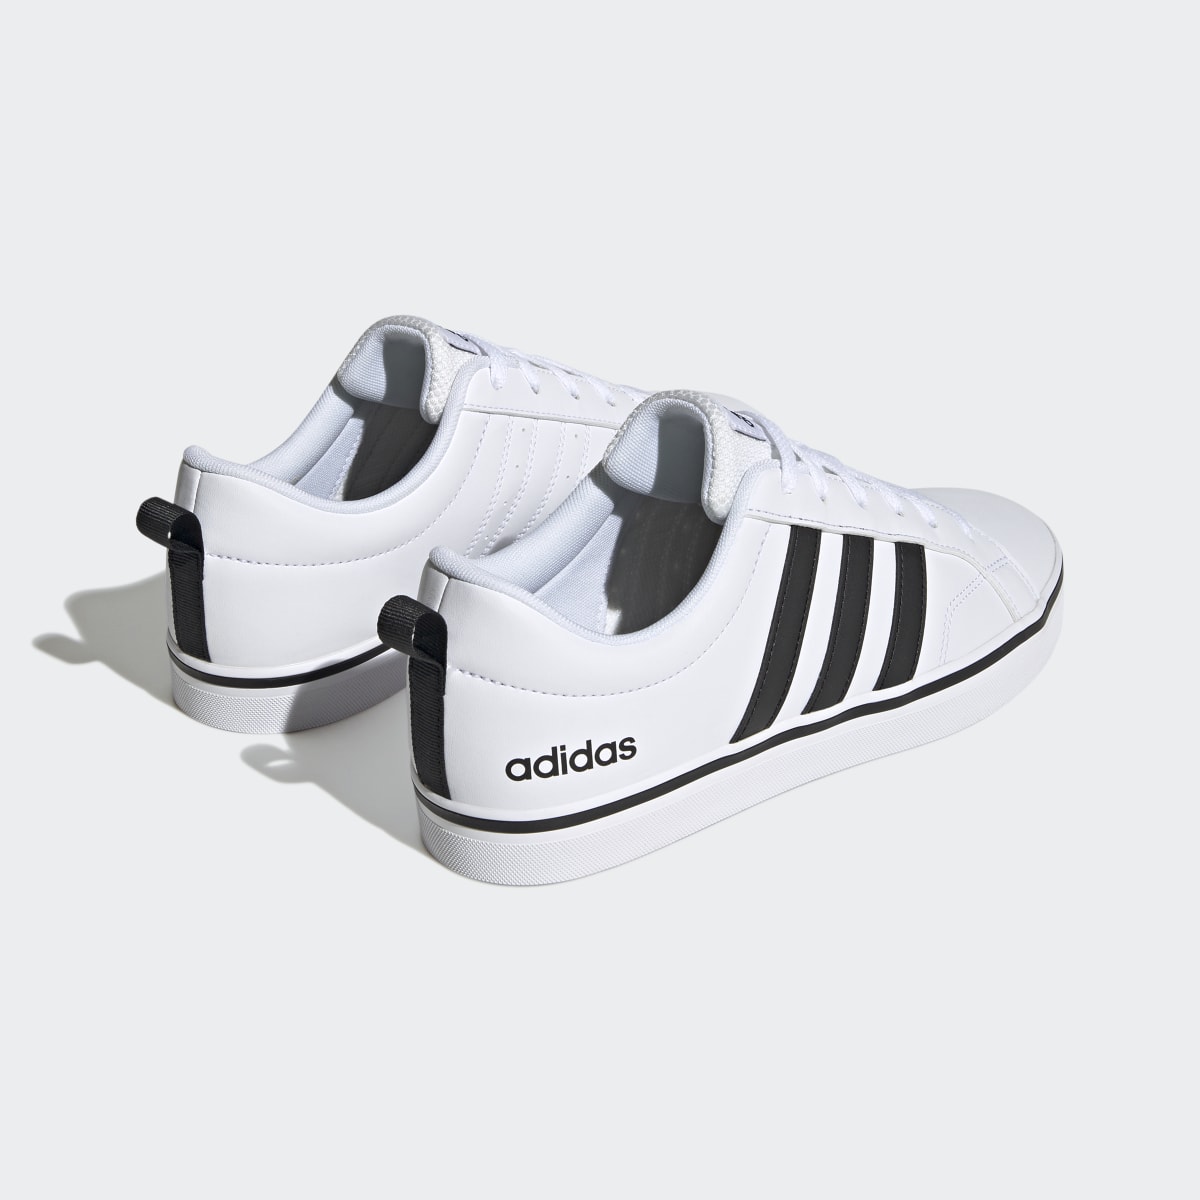 Adidas VS Pace 2.0 Shoes. 6